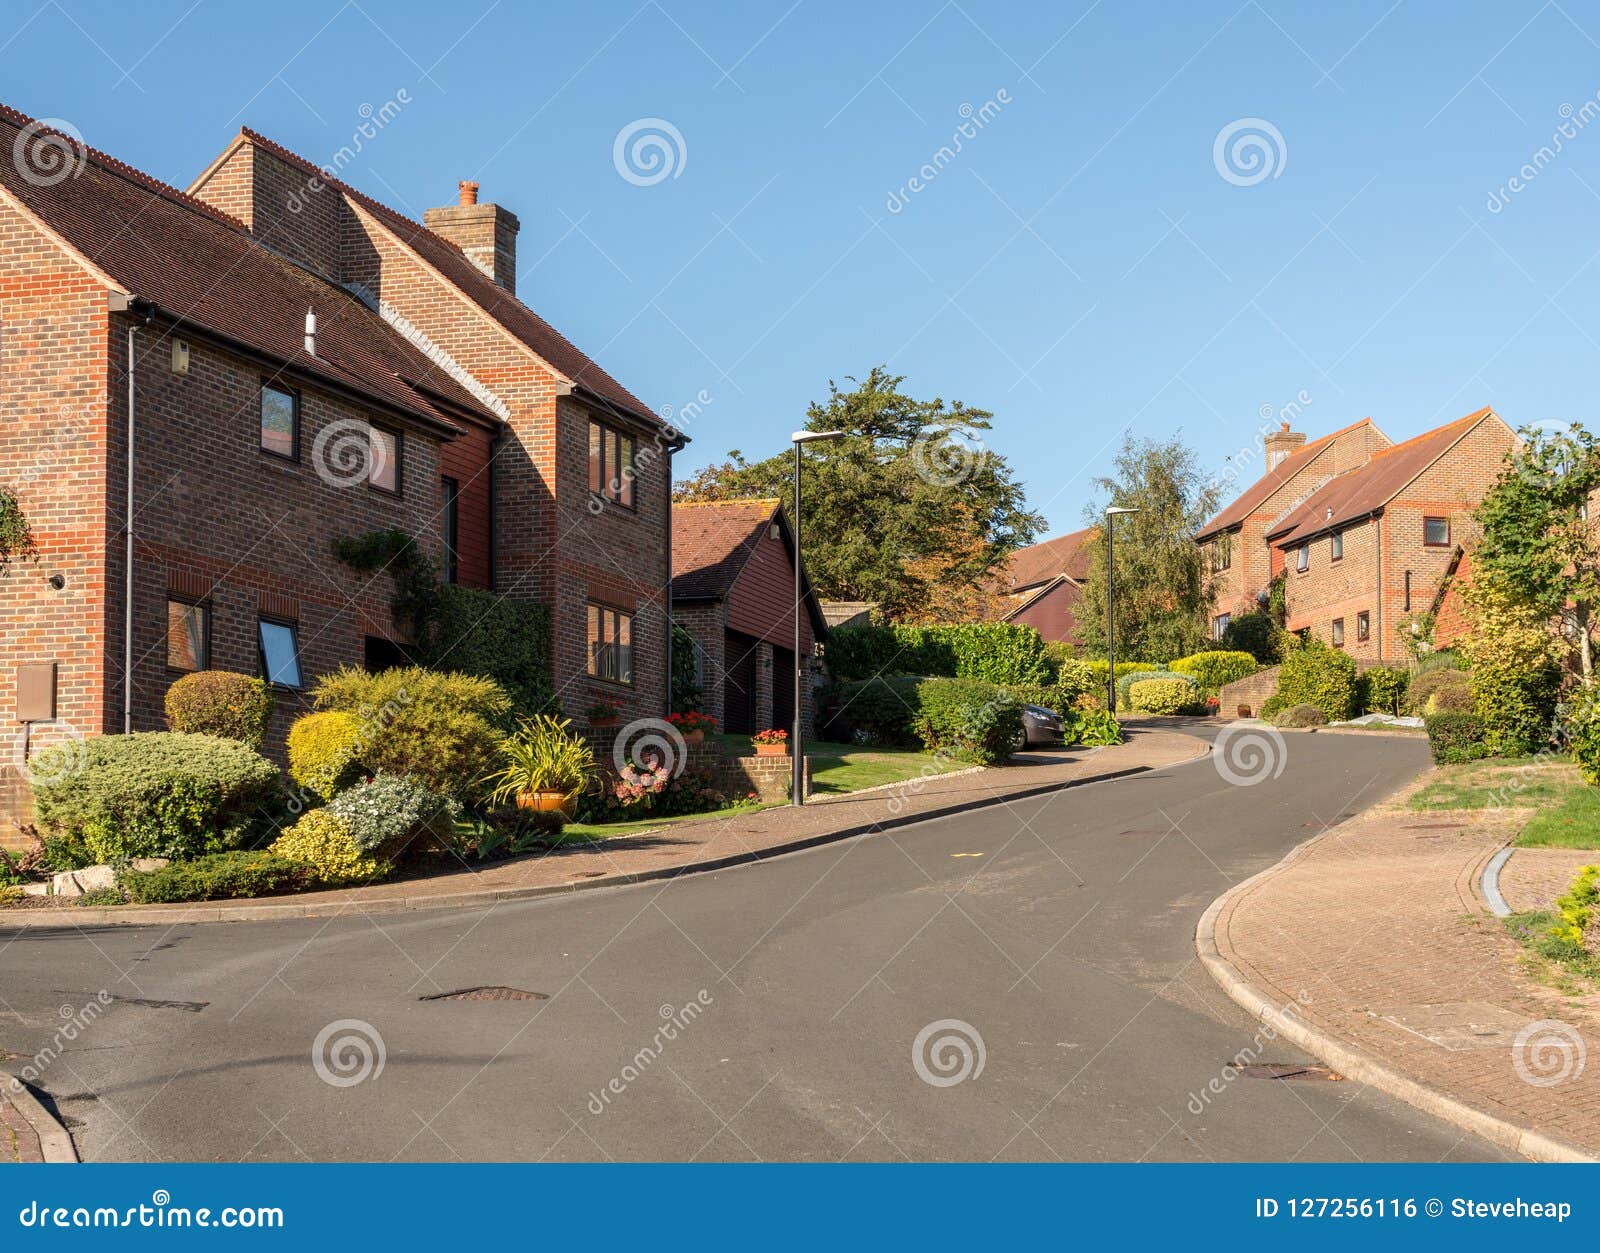 Street Of Modern English Detached Homes Stock Photo Image Of